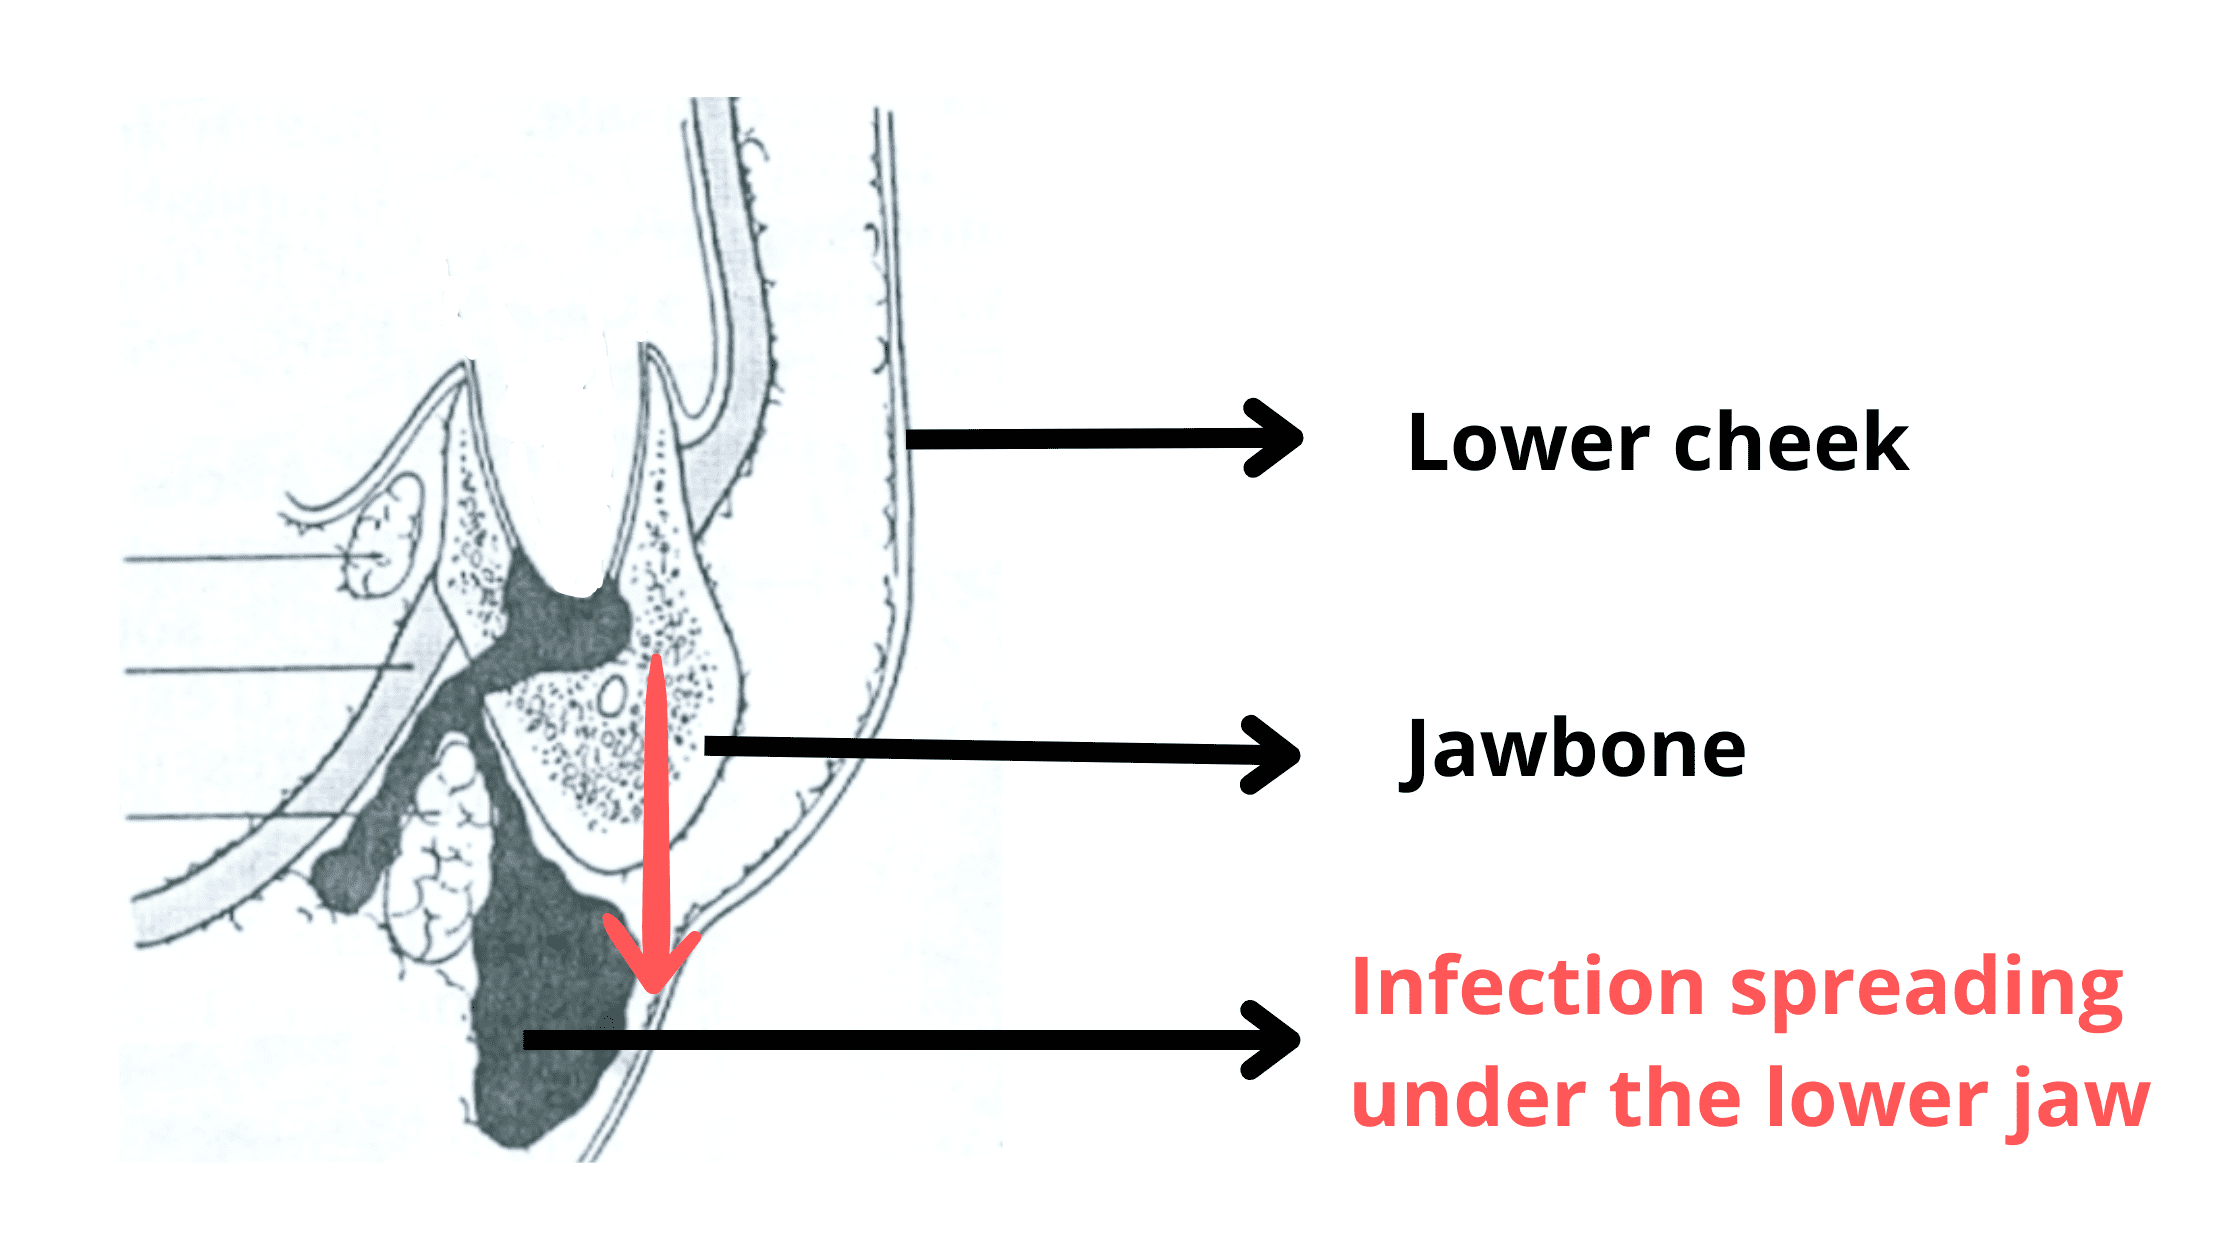 Dental infection spreading below the lower jaw